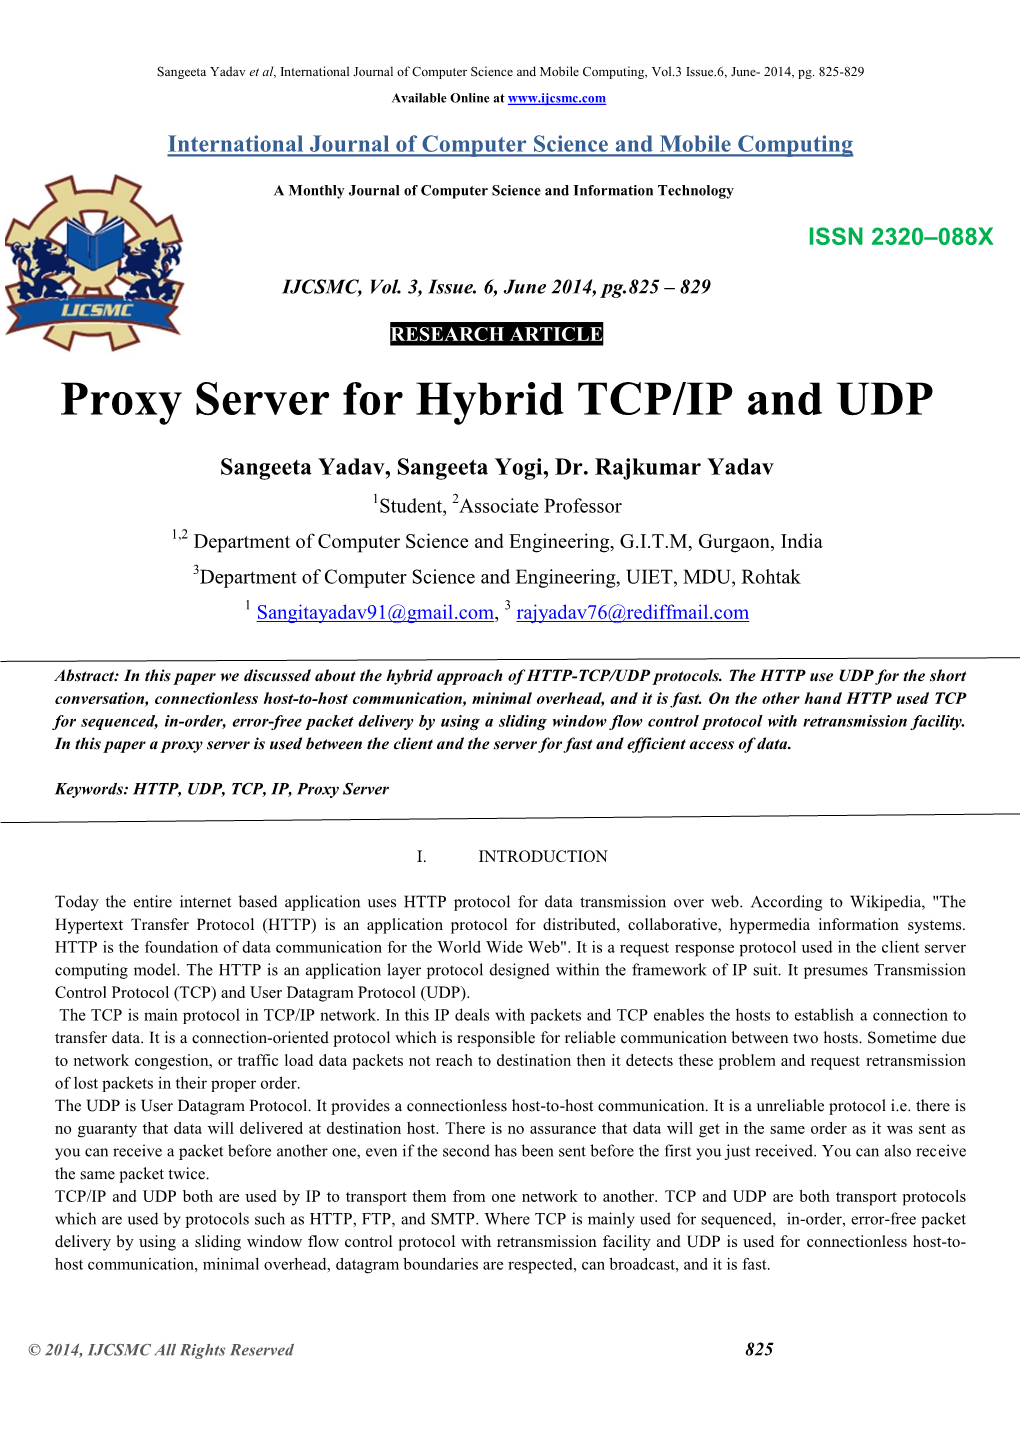 Proxy Server for Hybrid TCP/IP and UDP